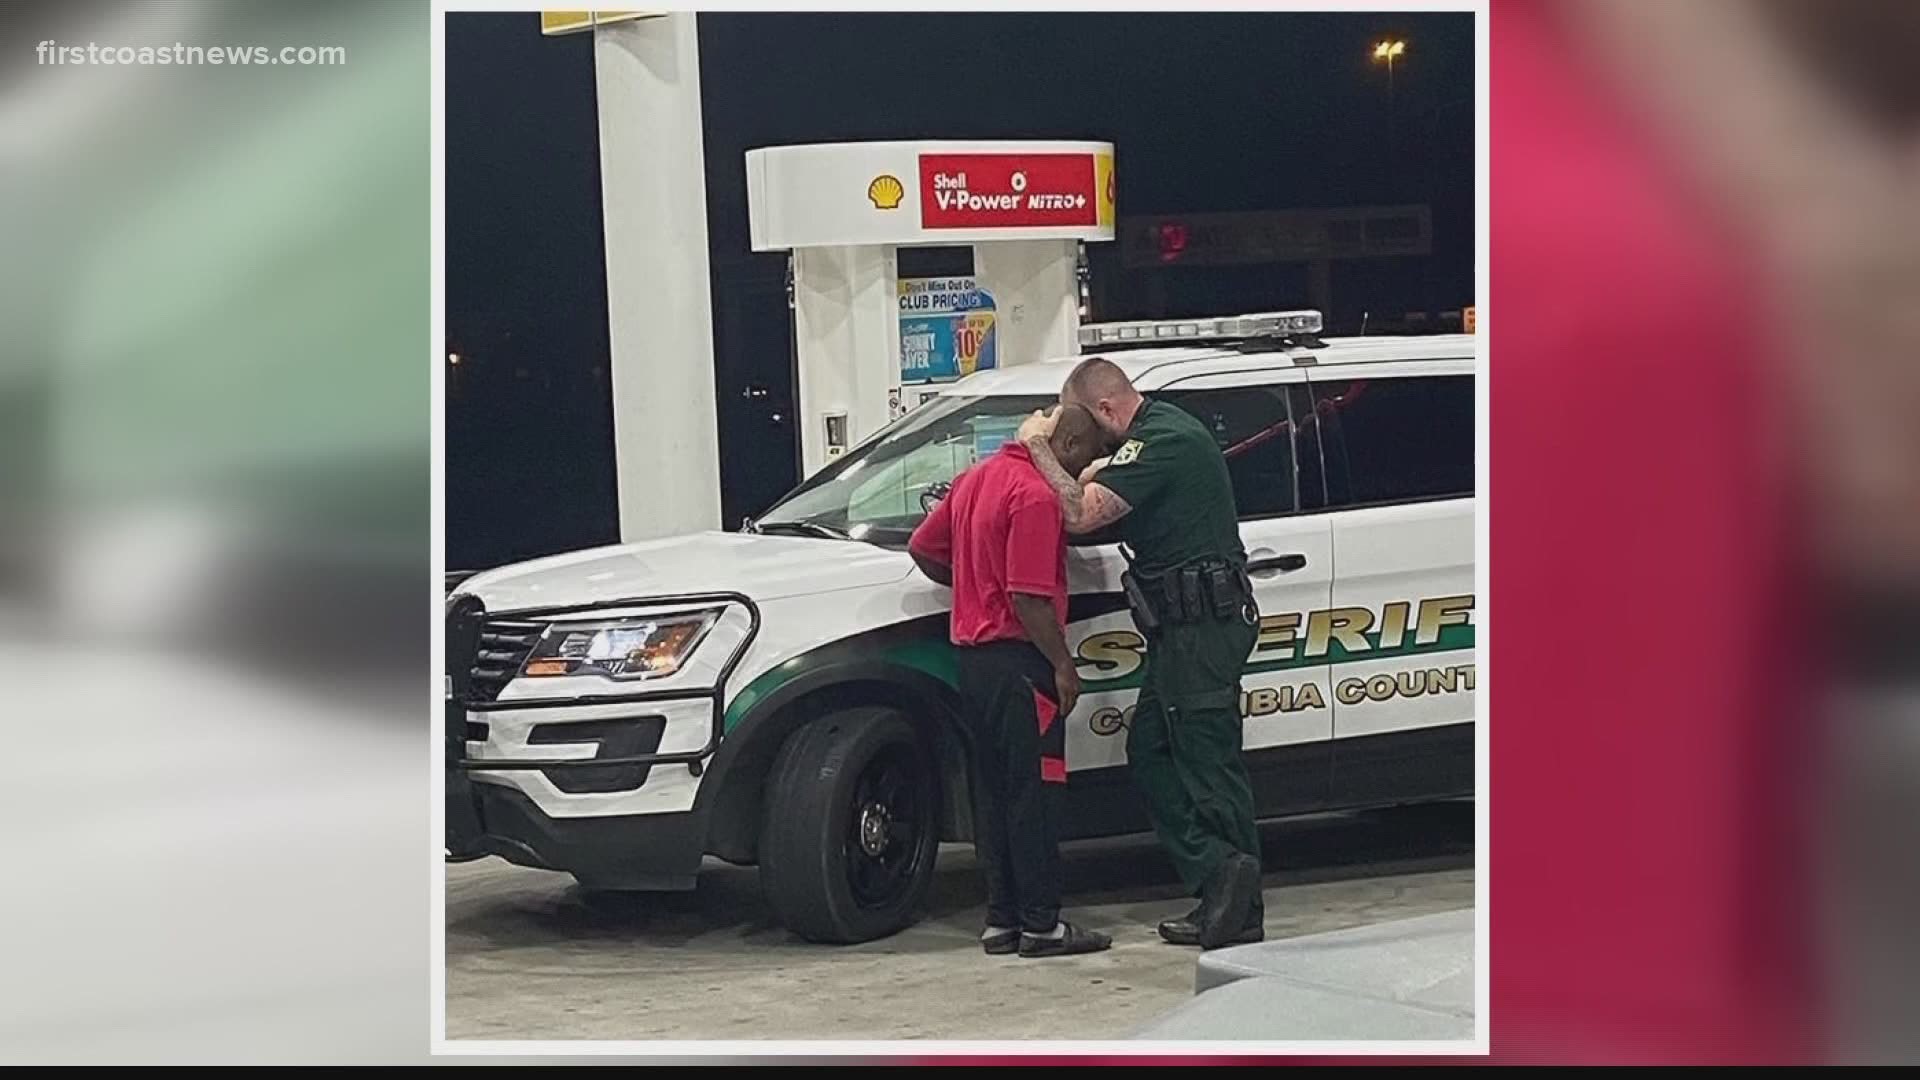 Deputy Alford said he was doing what his mother raised him to do by offering the gas station worker, Tony, comfort after a customer used a racial slur against him.